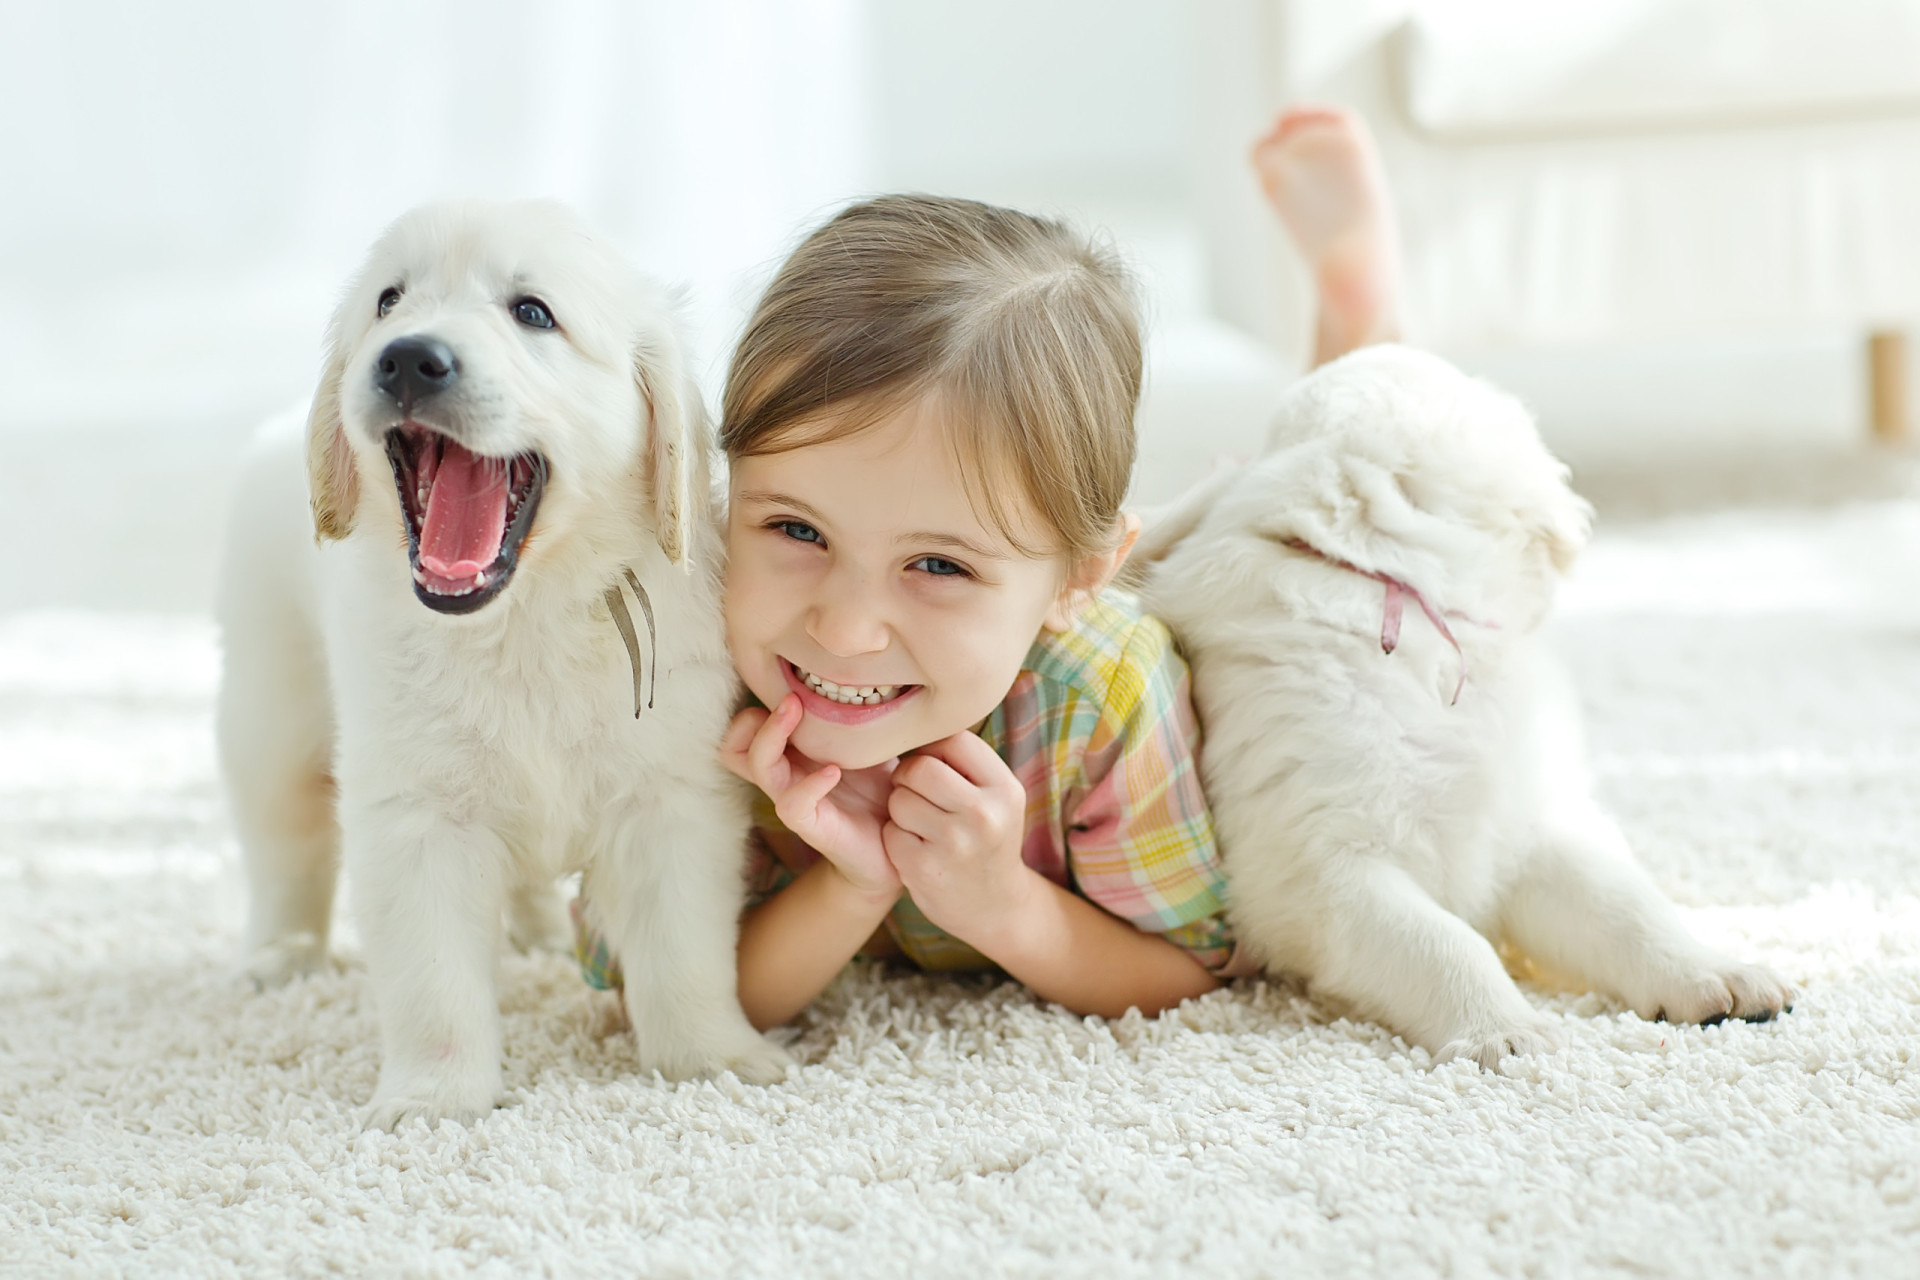 <p>Teaching kids to be gentle and kind to animals fosters empathy. It's a lesson in understanding and respecting the feelings and needs of our furry friends.</p><p>You may also like:<a href="https://www.starsinsider.com/n/178898?utm_source=msn.com&utm_medium=display&utm_campaign=referral_description&utm_content=588009en-en"> 42 incredible things to do at least once in a lifetime</a></p>